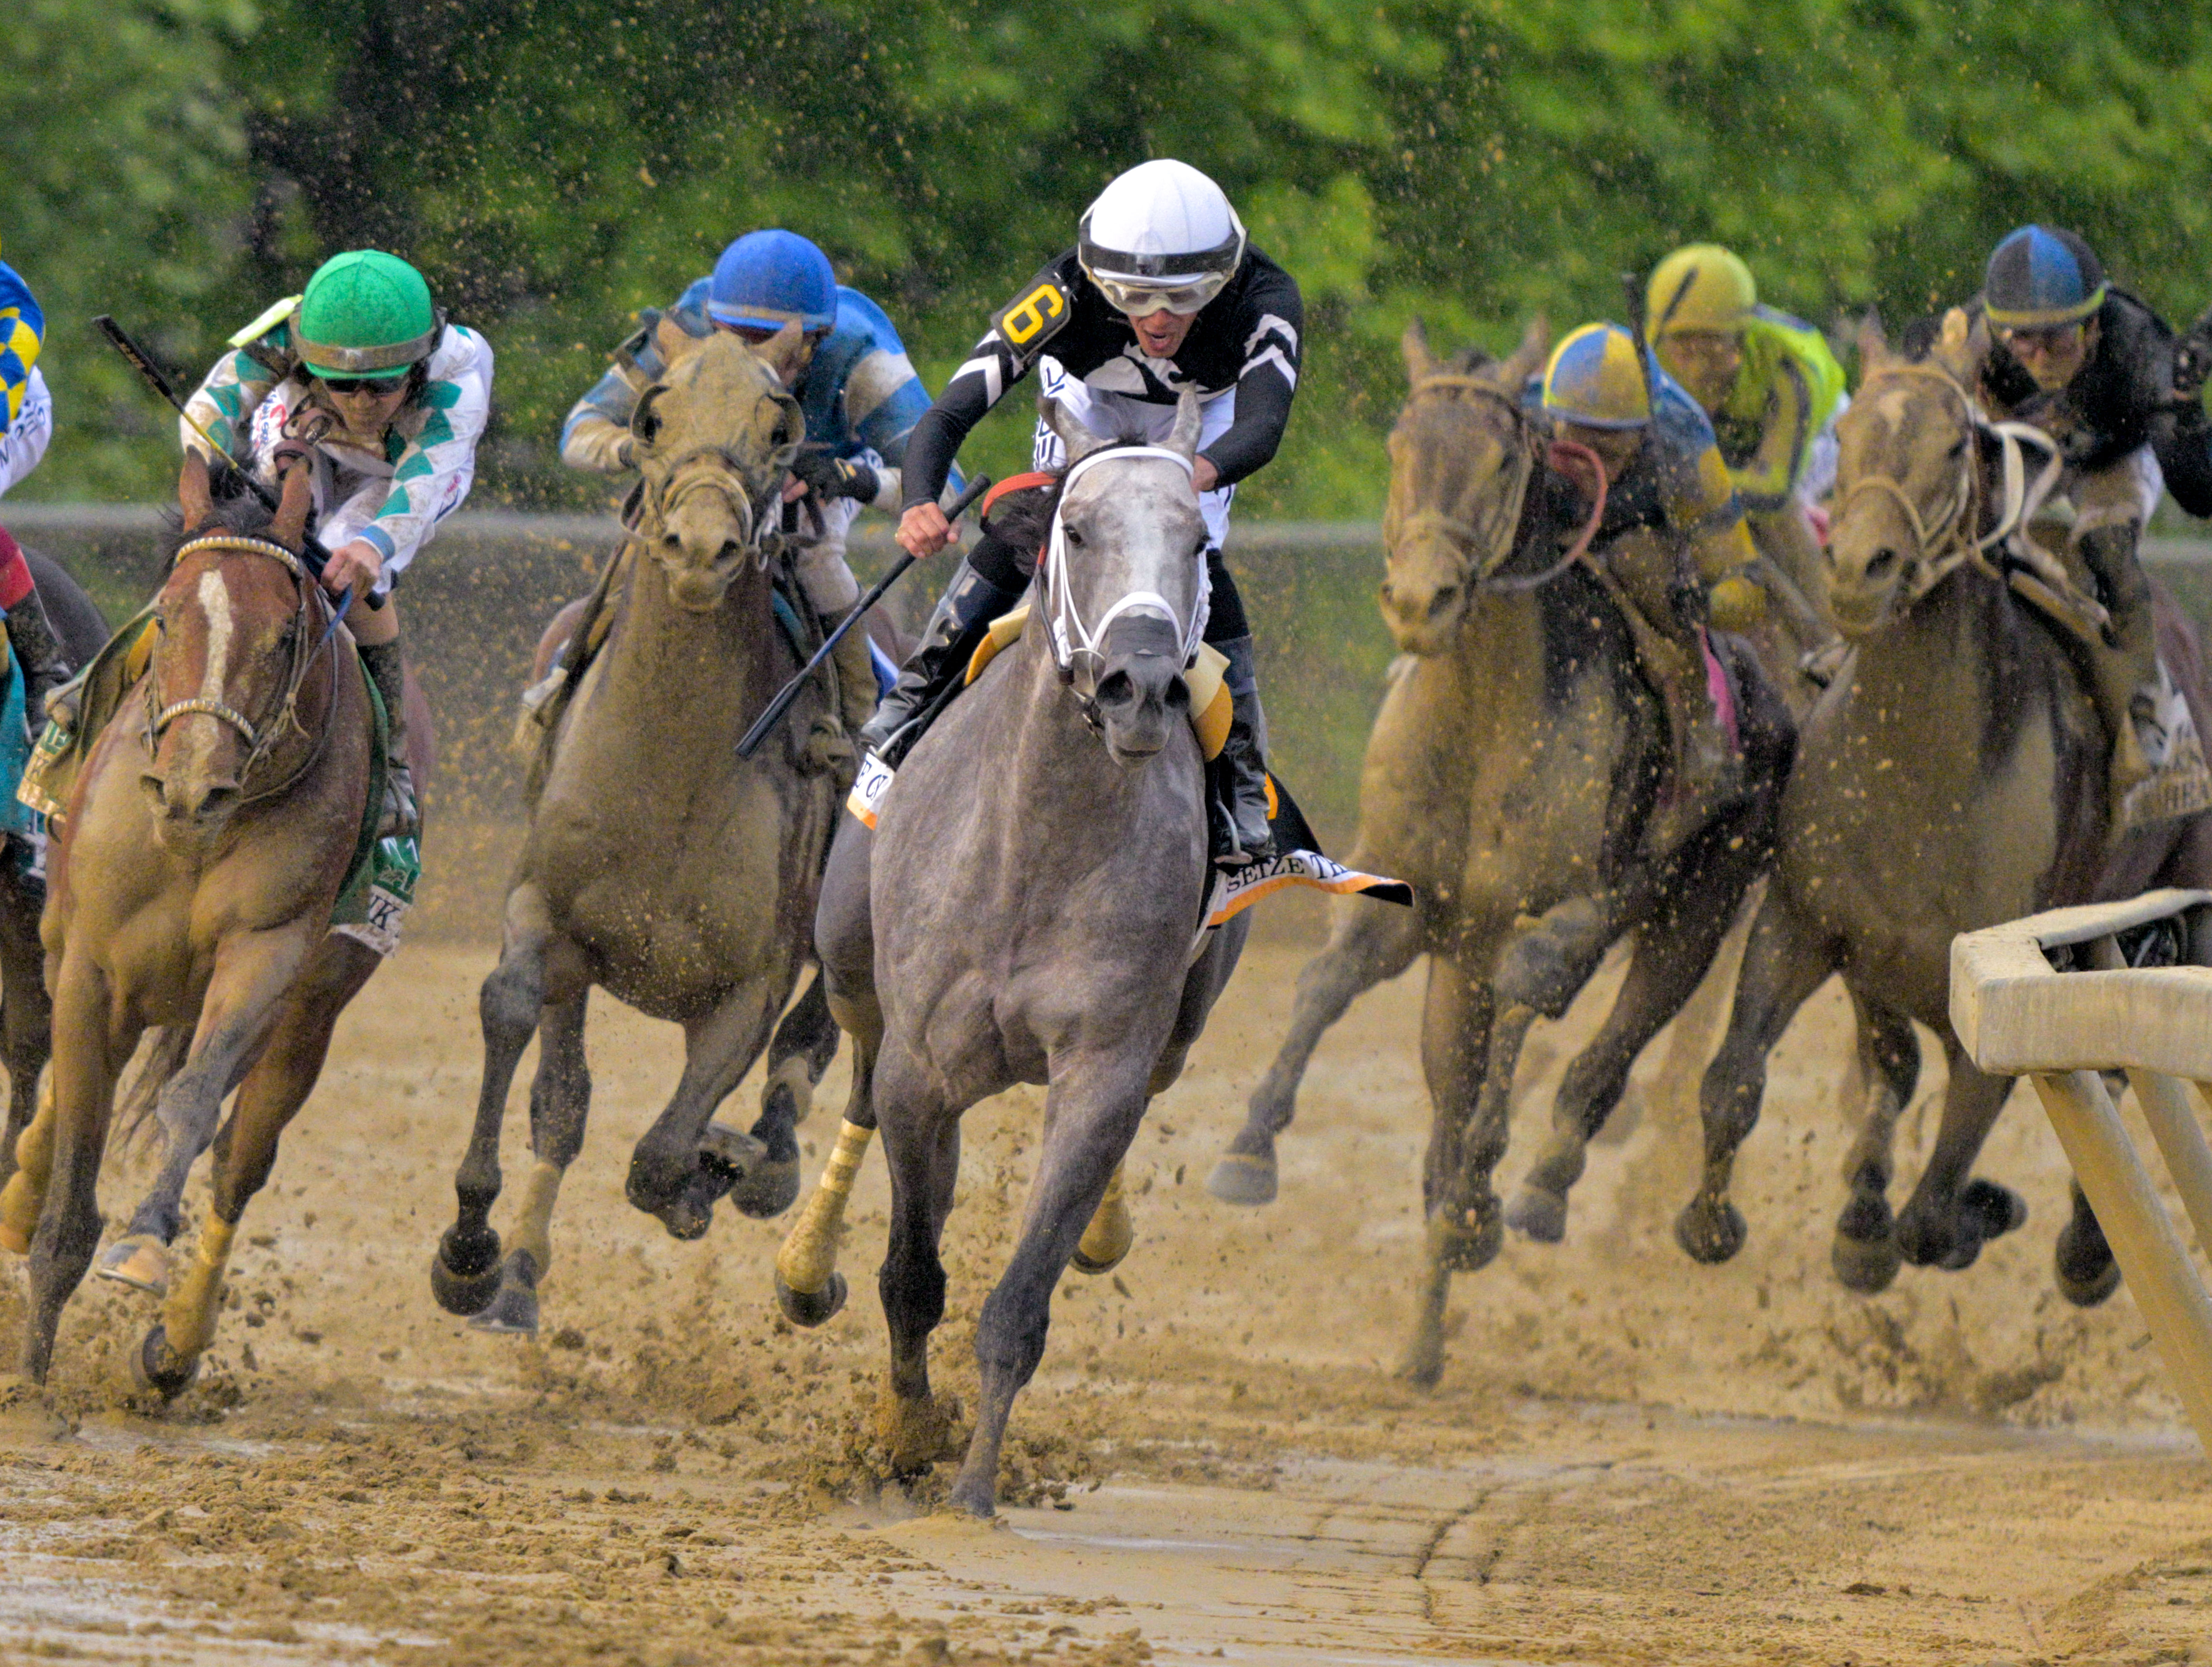 No. 6, Seize the Grey ridden by Jaime Torres dirties up the rest of the field while breaking into the final stretch to seize the 149th running of the Preakness Stakes at Pimlico Race Course. Seize the Grey ridden by Jaime Torres won. (Karl Merton Ferron/Staff)